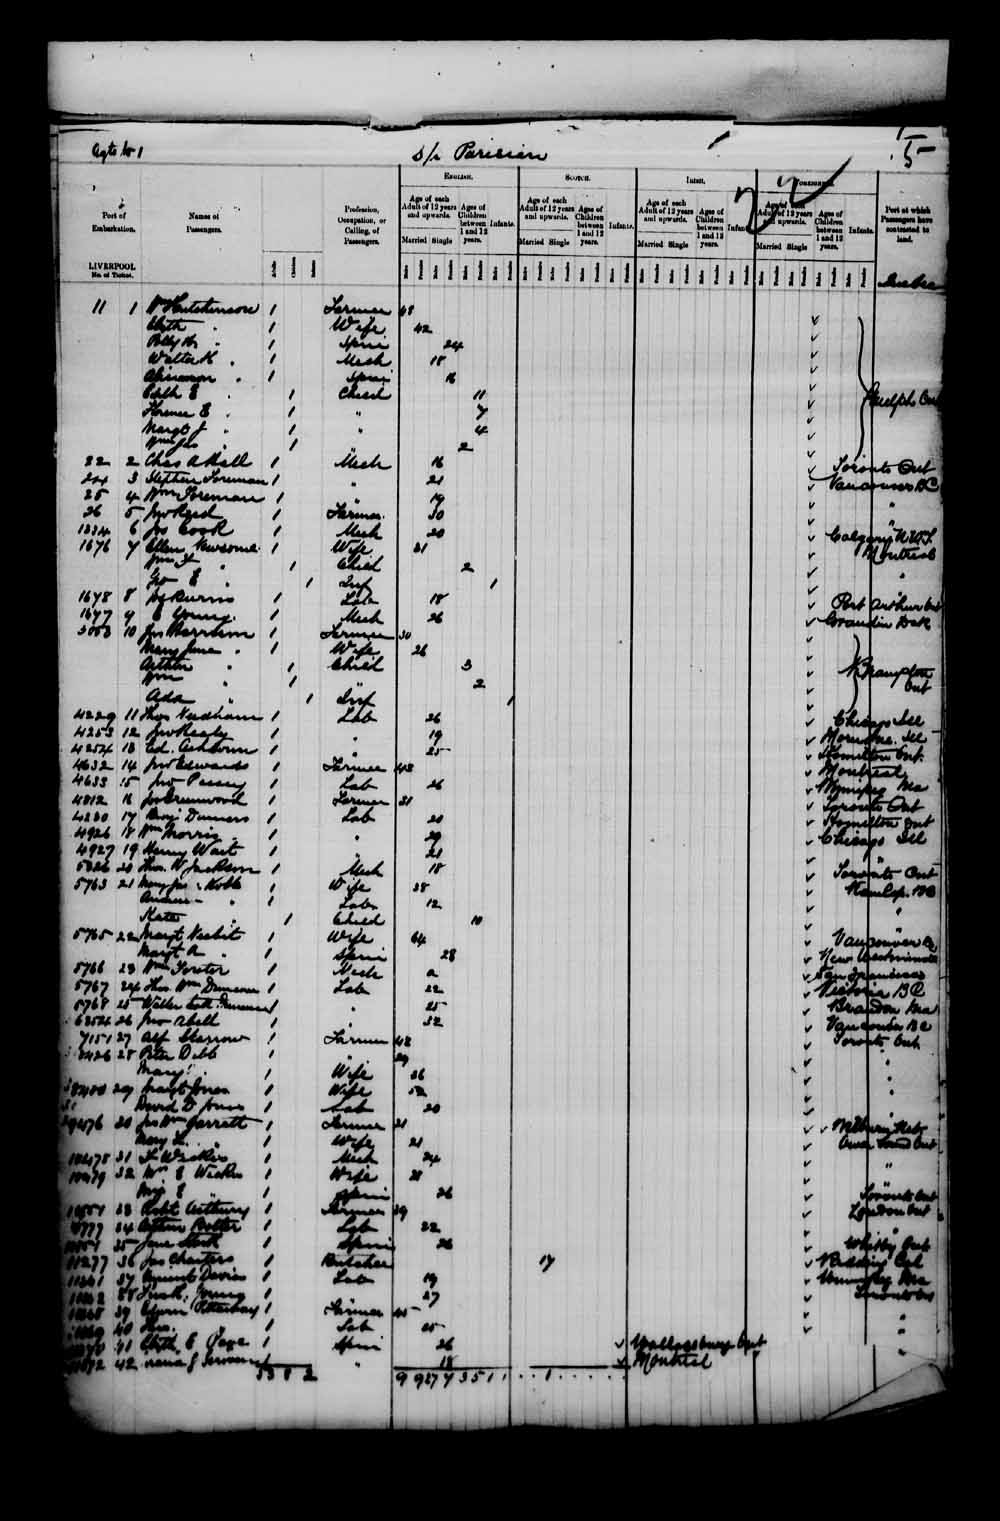 Digitized page of Passenger Lists for Image No.: e003549676